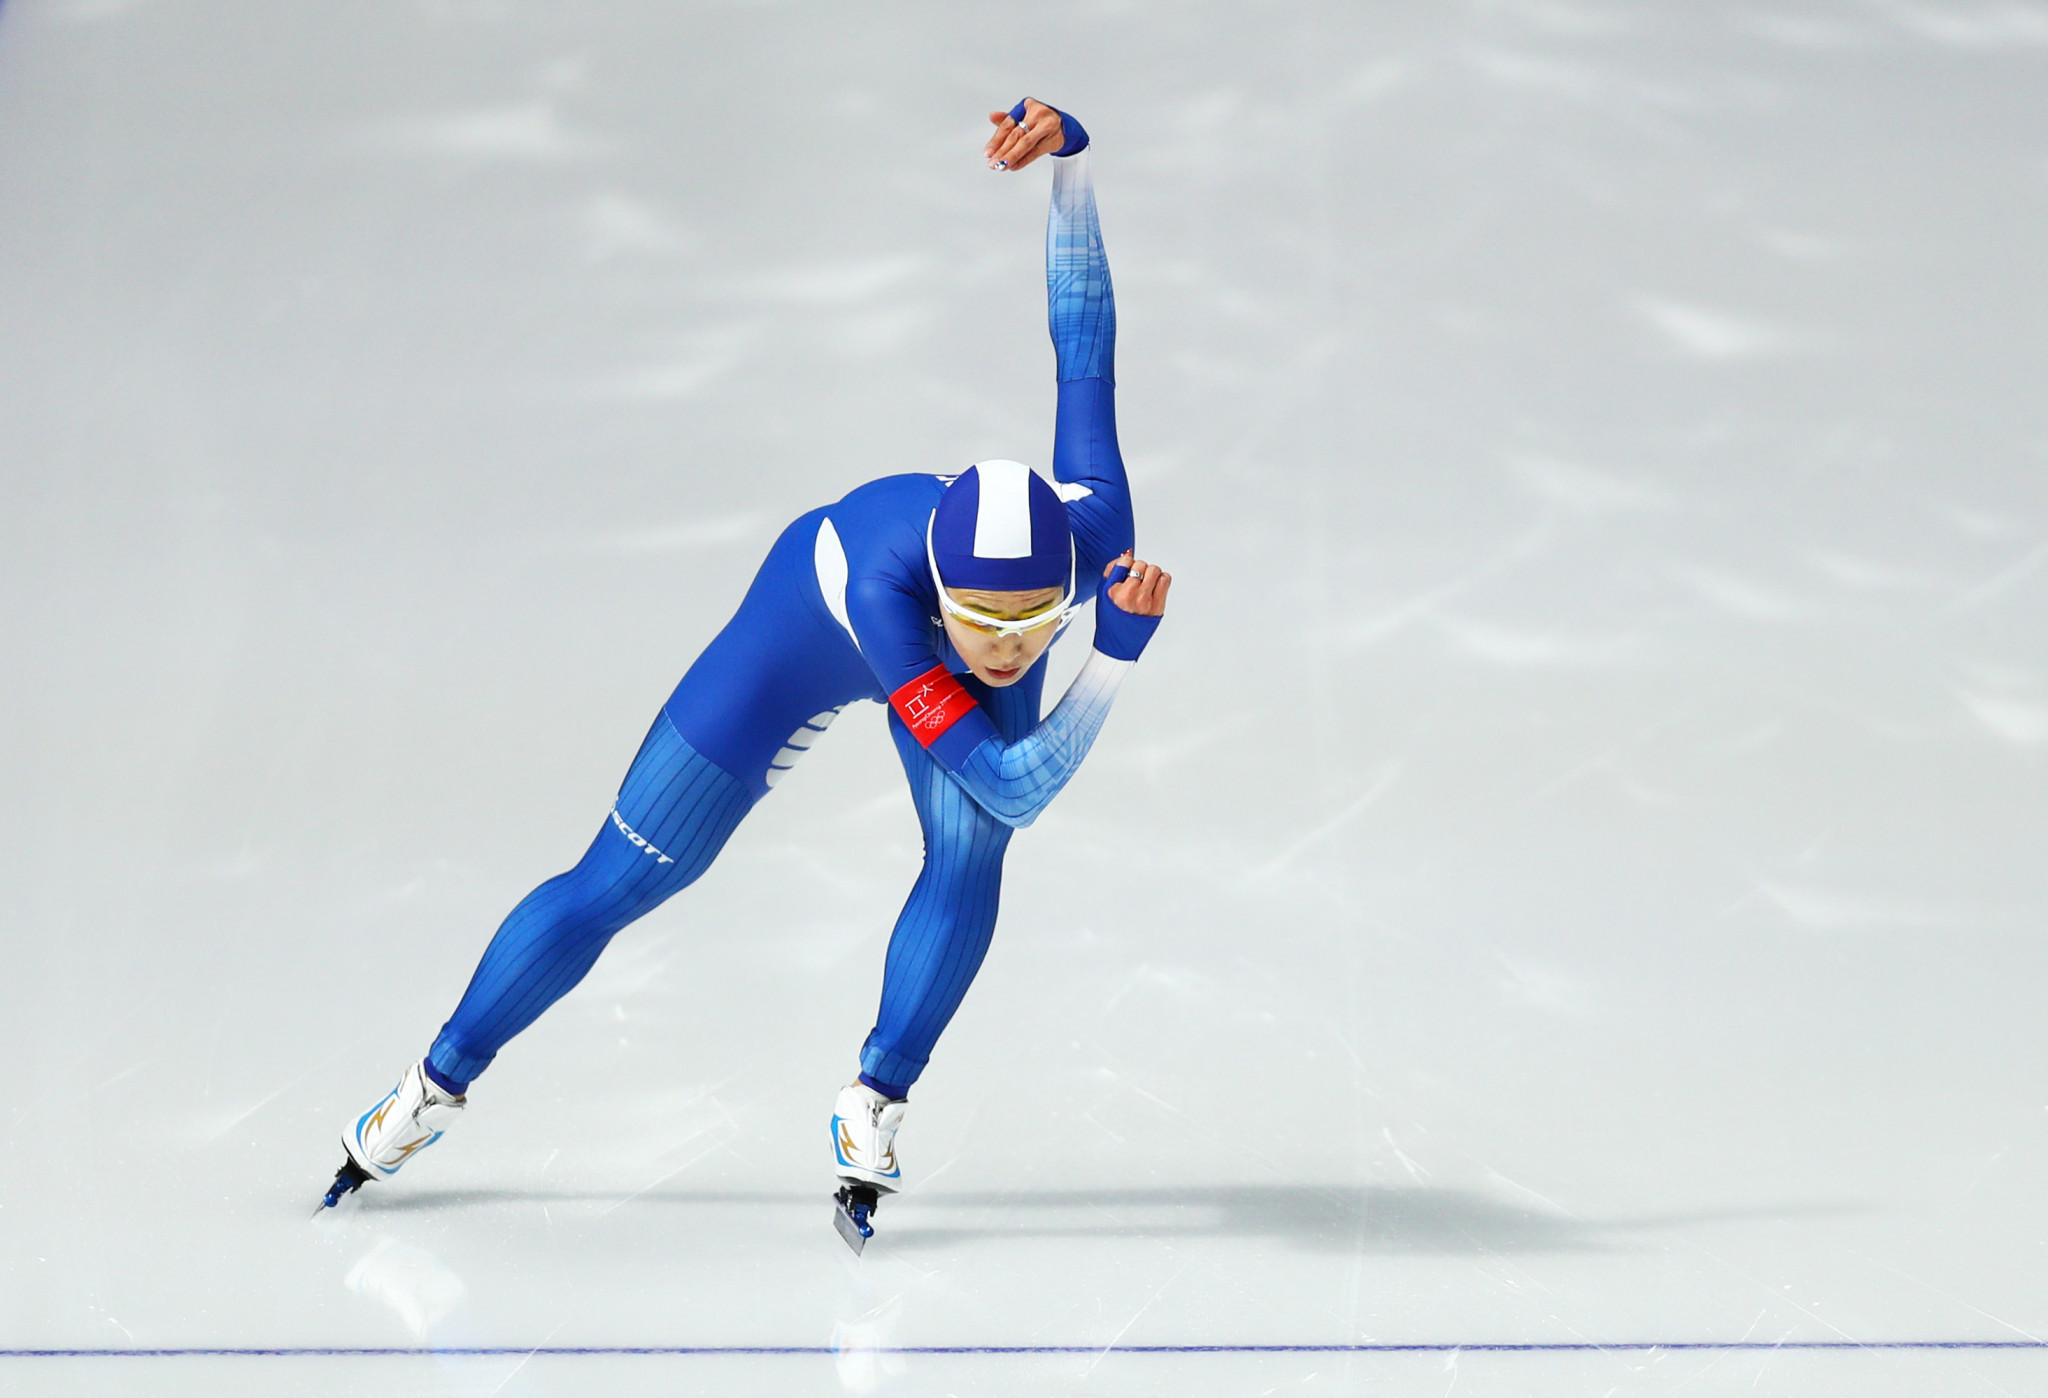 Two-time Olympic champion speed skater Lee set to retire